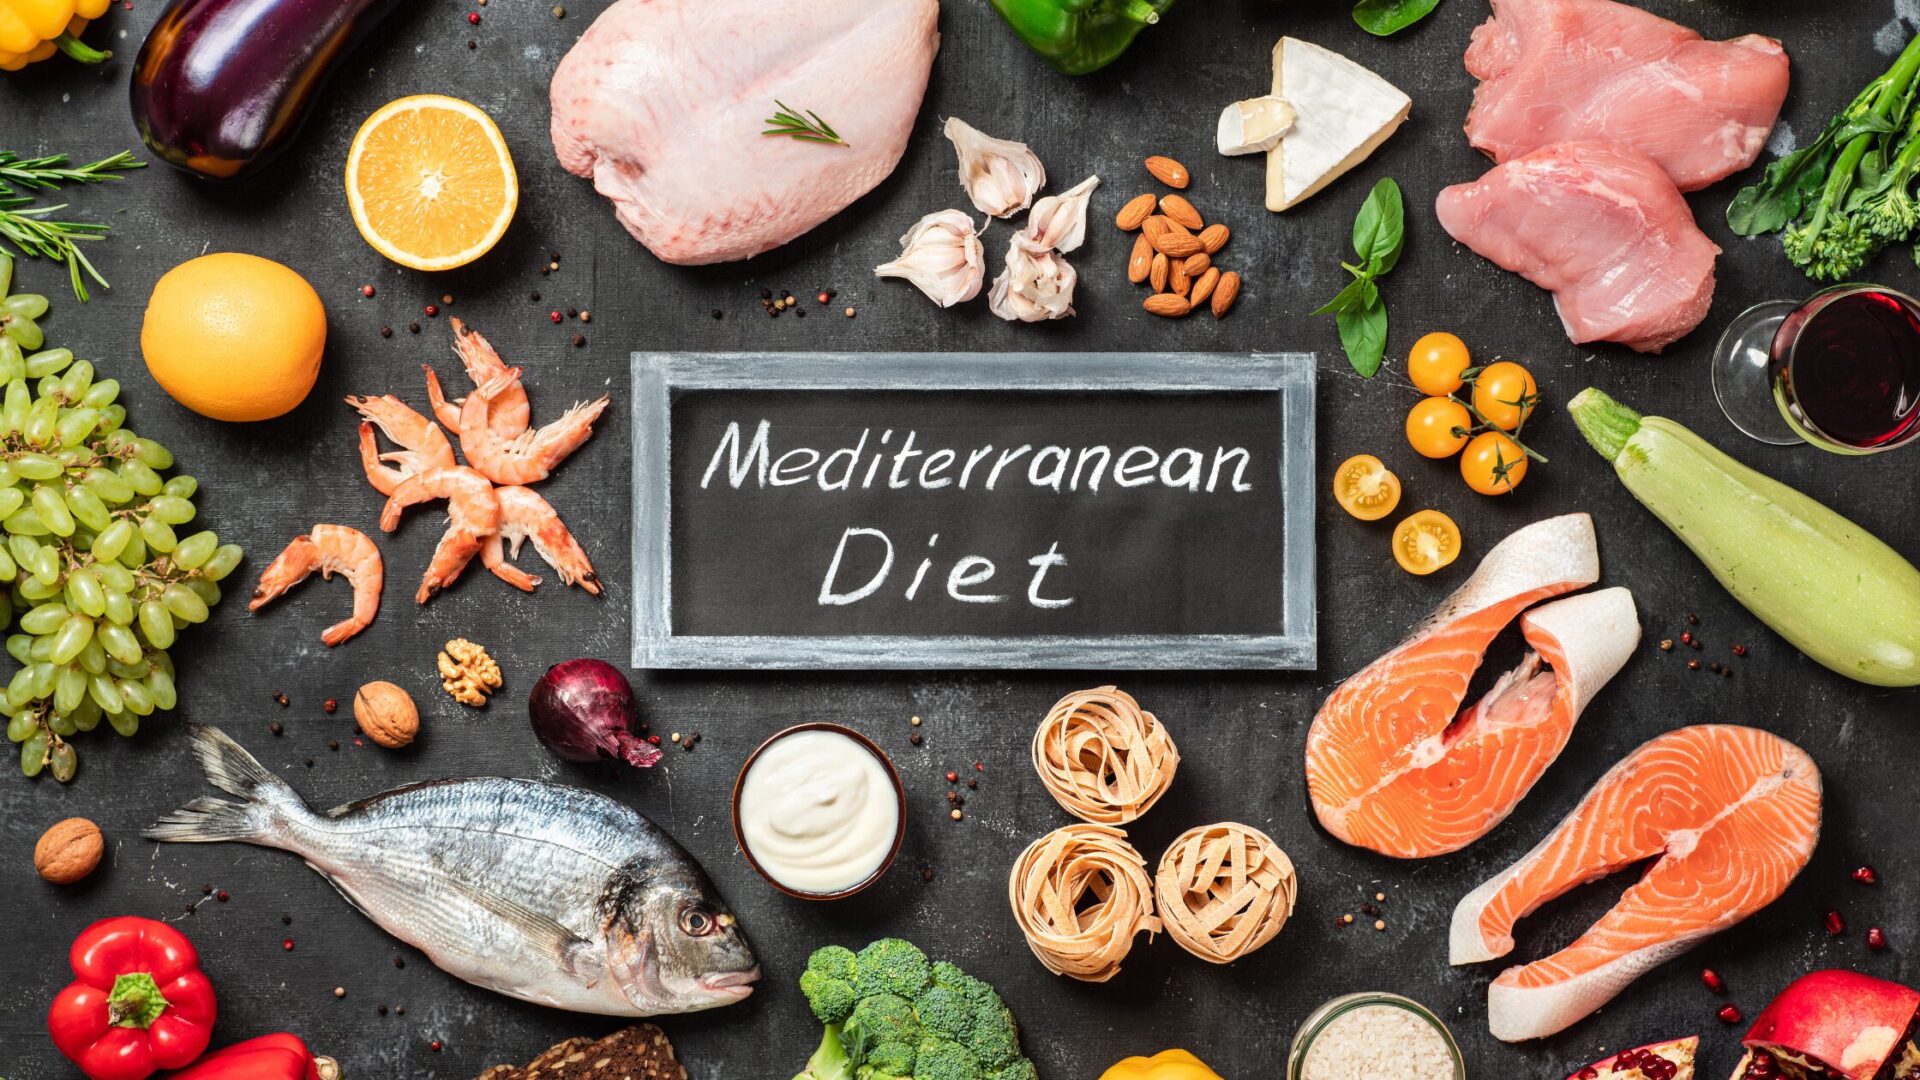 What are the main foods in a Mediterranean diet?